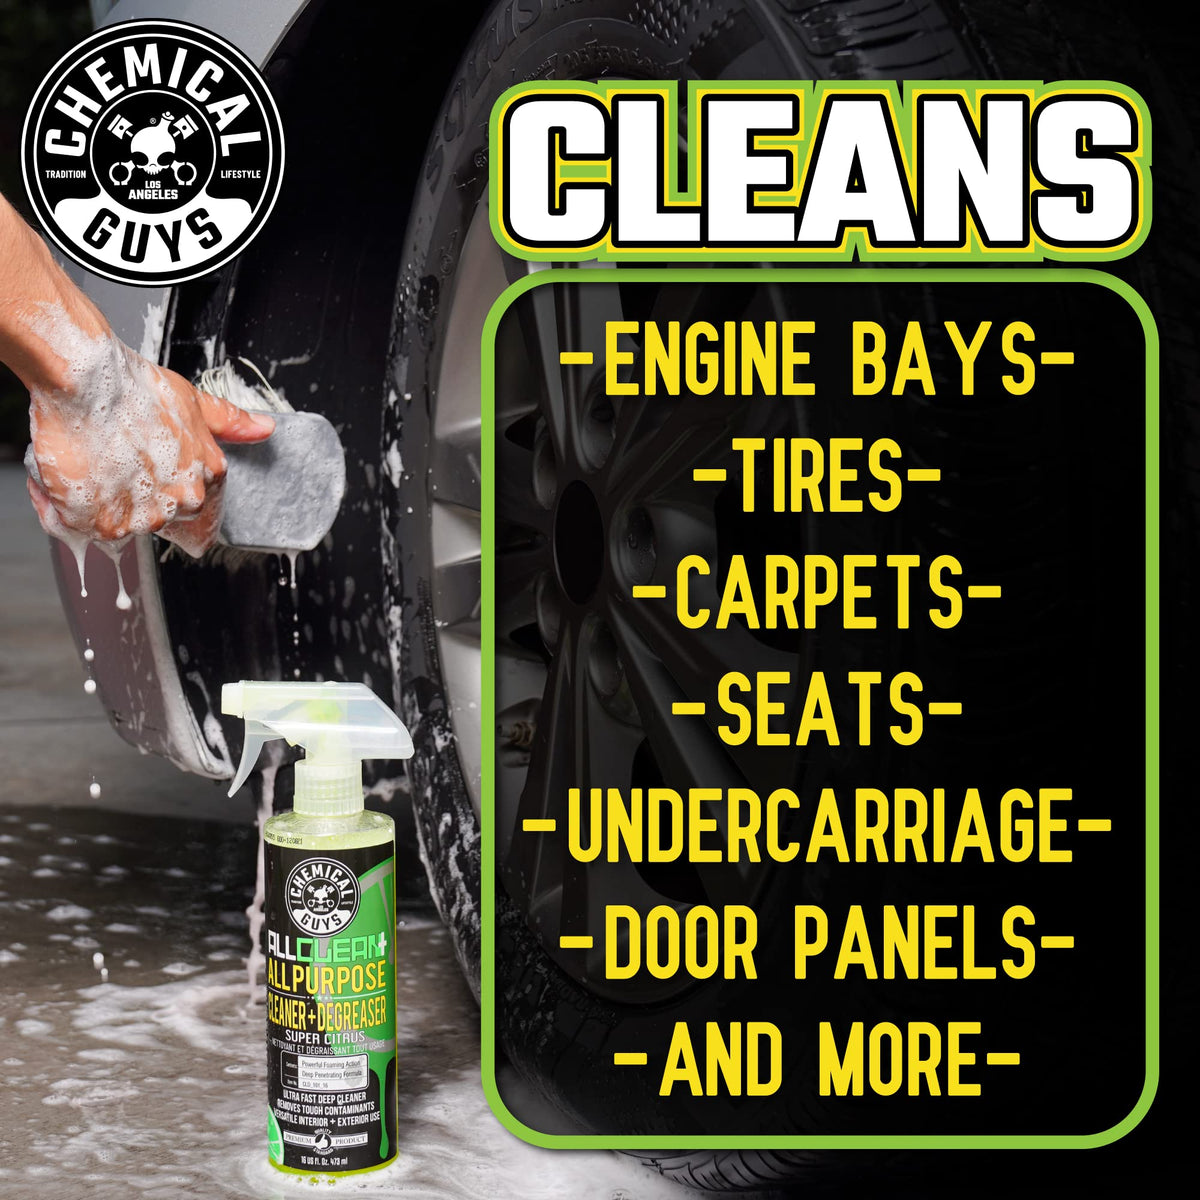 Chemical Guys Leather Cleaner - Colorless & Odorless Super Cleaner